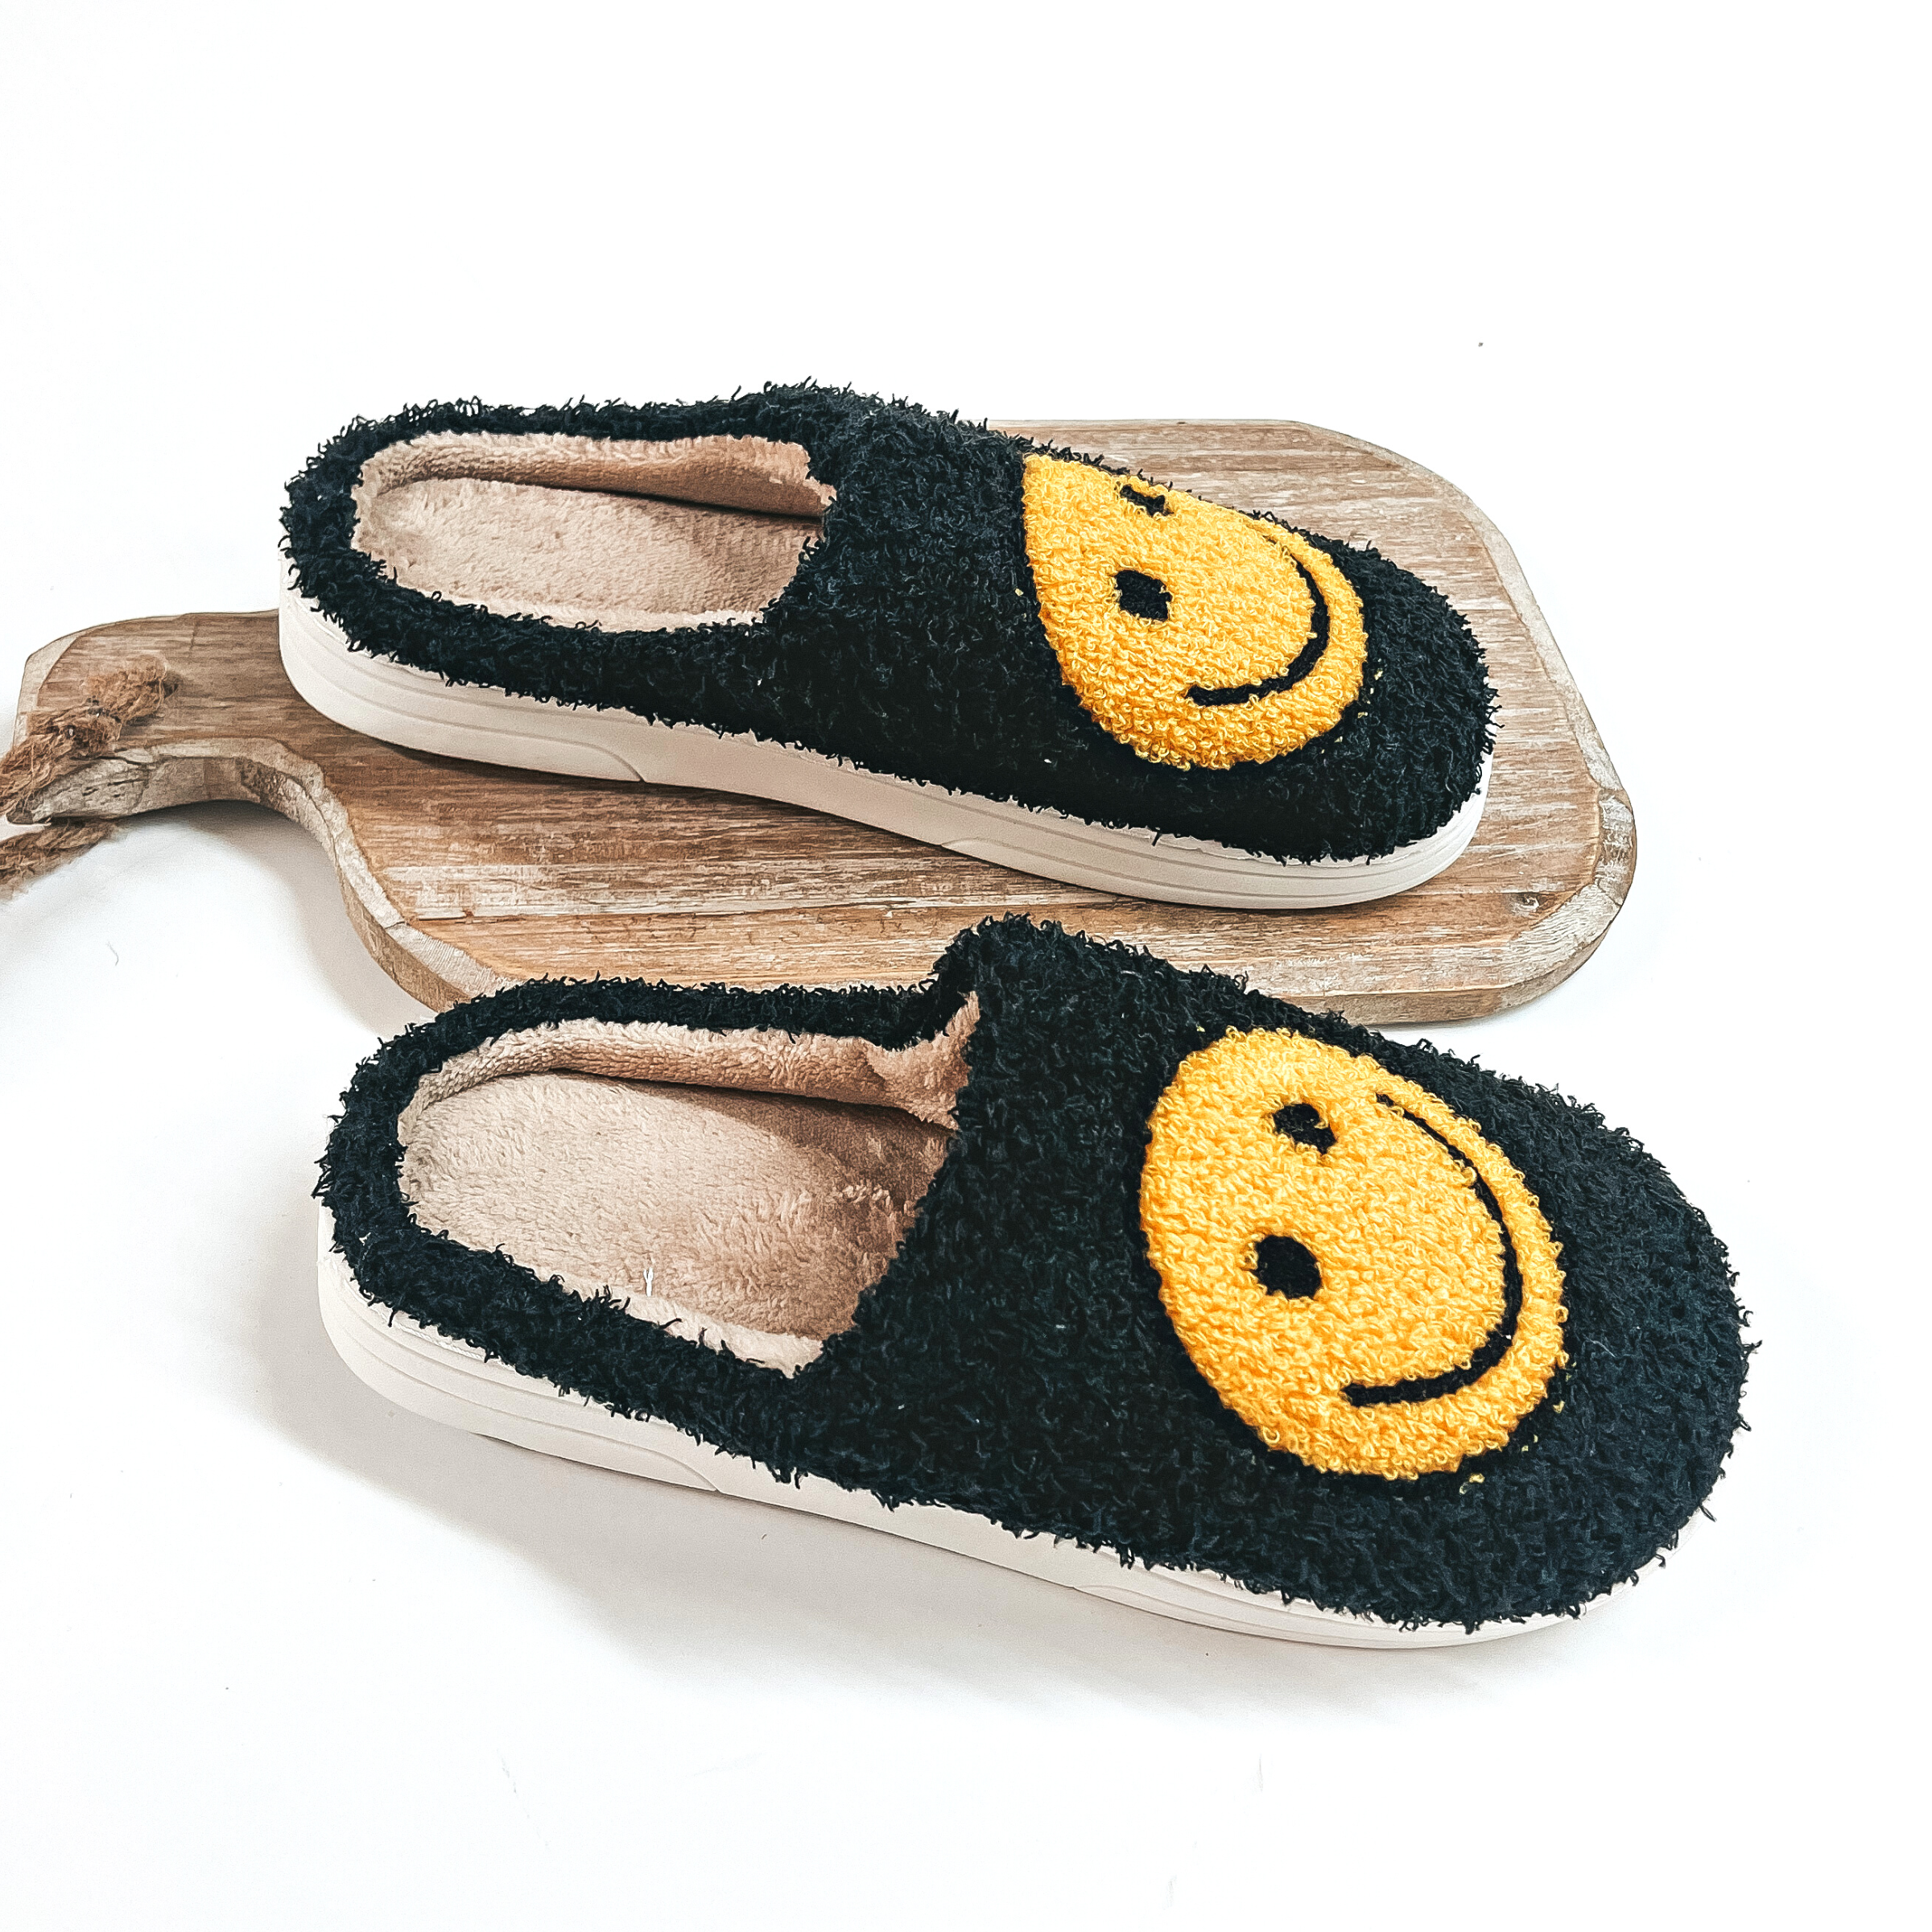 There are sherpa slippers in black with yellow happy faces on top of each  slipper. The inside is in brown and the bottom sole is white. One slipper  is placed on a wooden slab and the other slipper is on a white background.